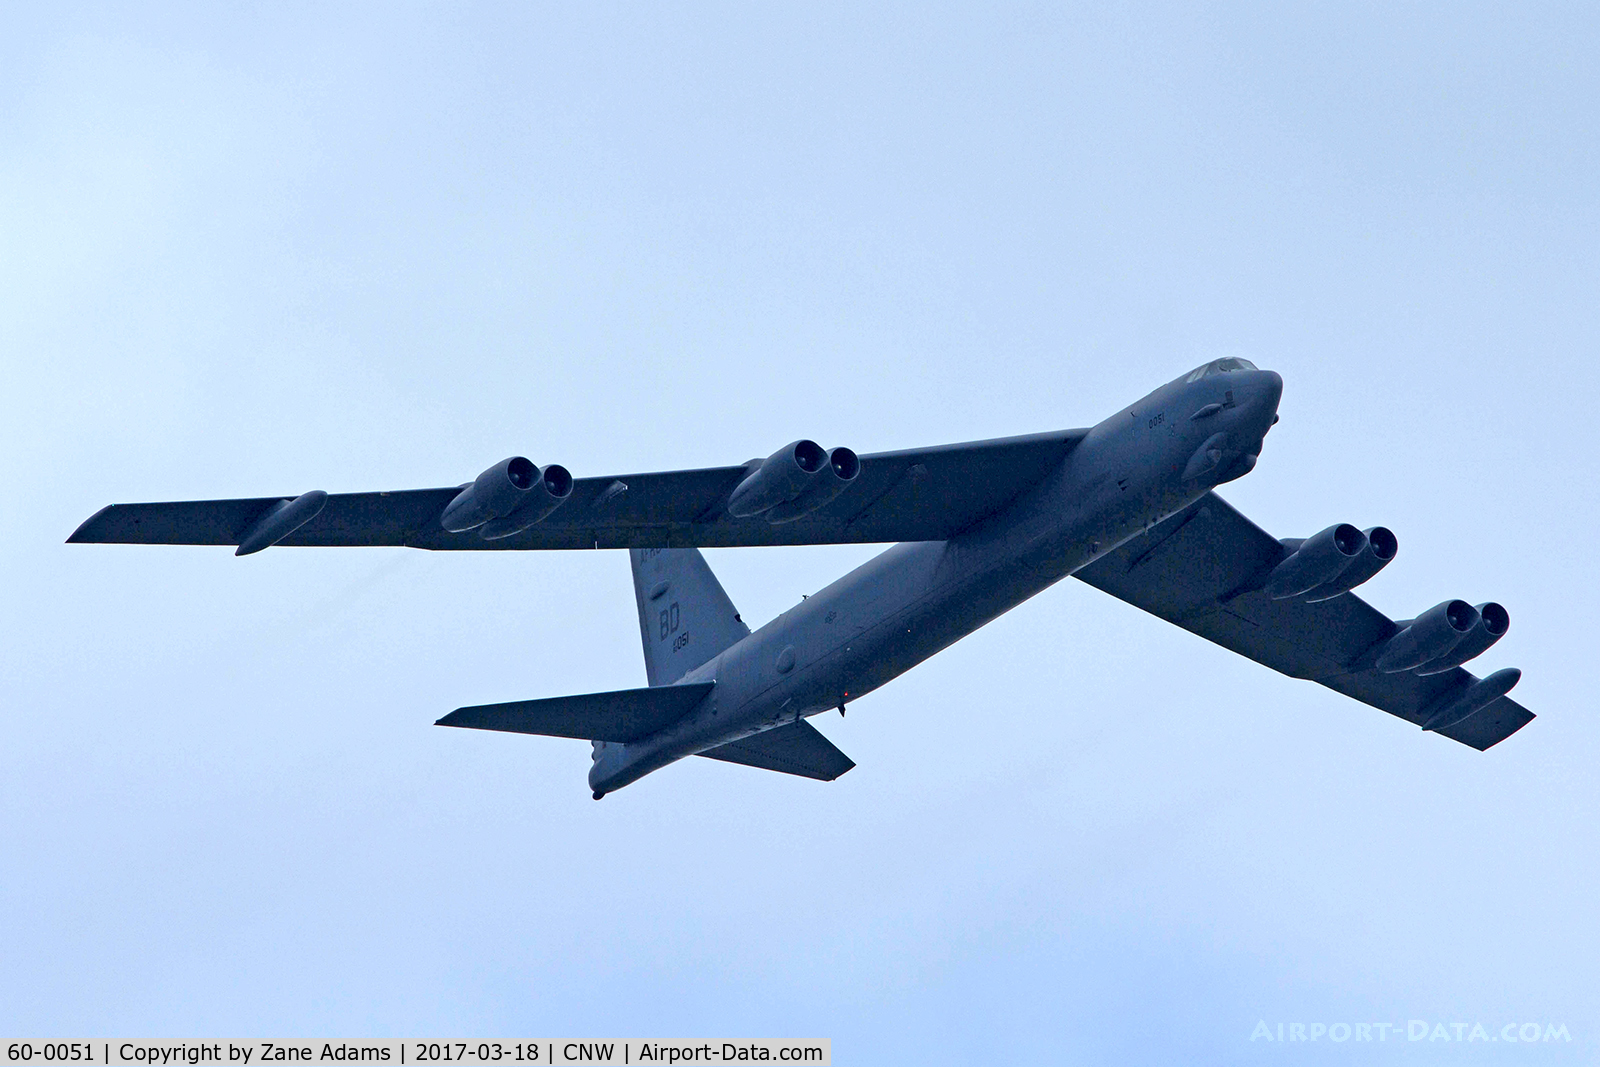 60-0051, 1960 Boeing B-52H Stratofortress C/N 464416, At the 2017 Heart of Texas Airshow